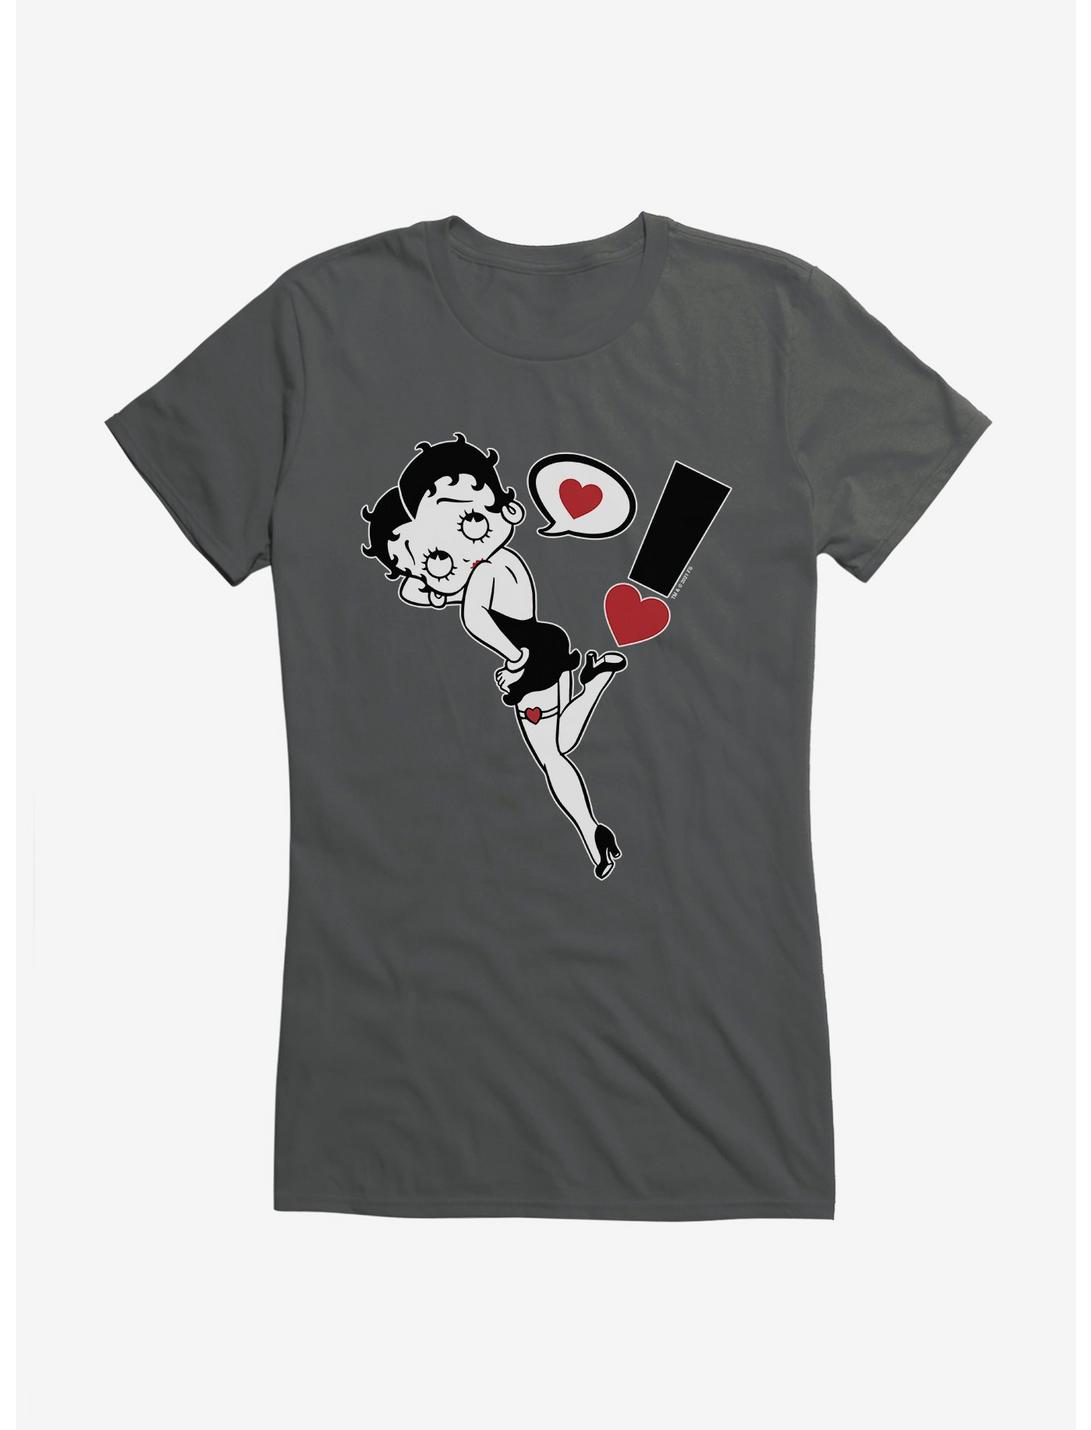 Betty Boop Exclamation of Love  Girls T-Shirt, CHARCOAL, hi-res